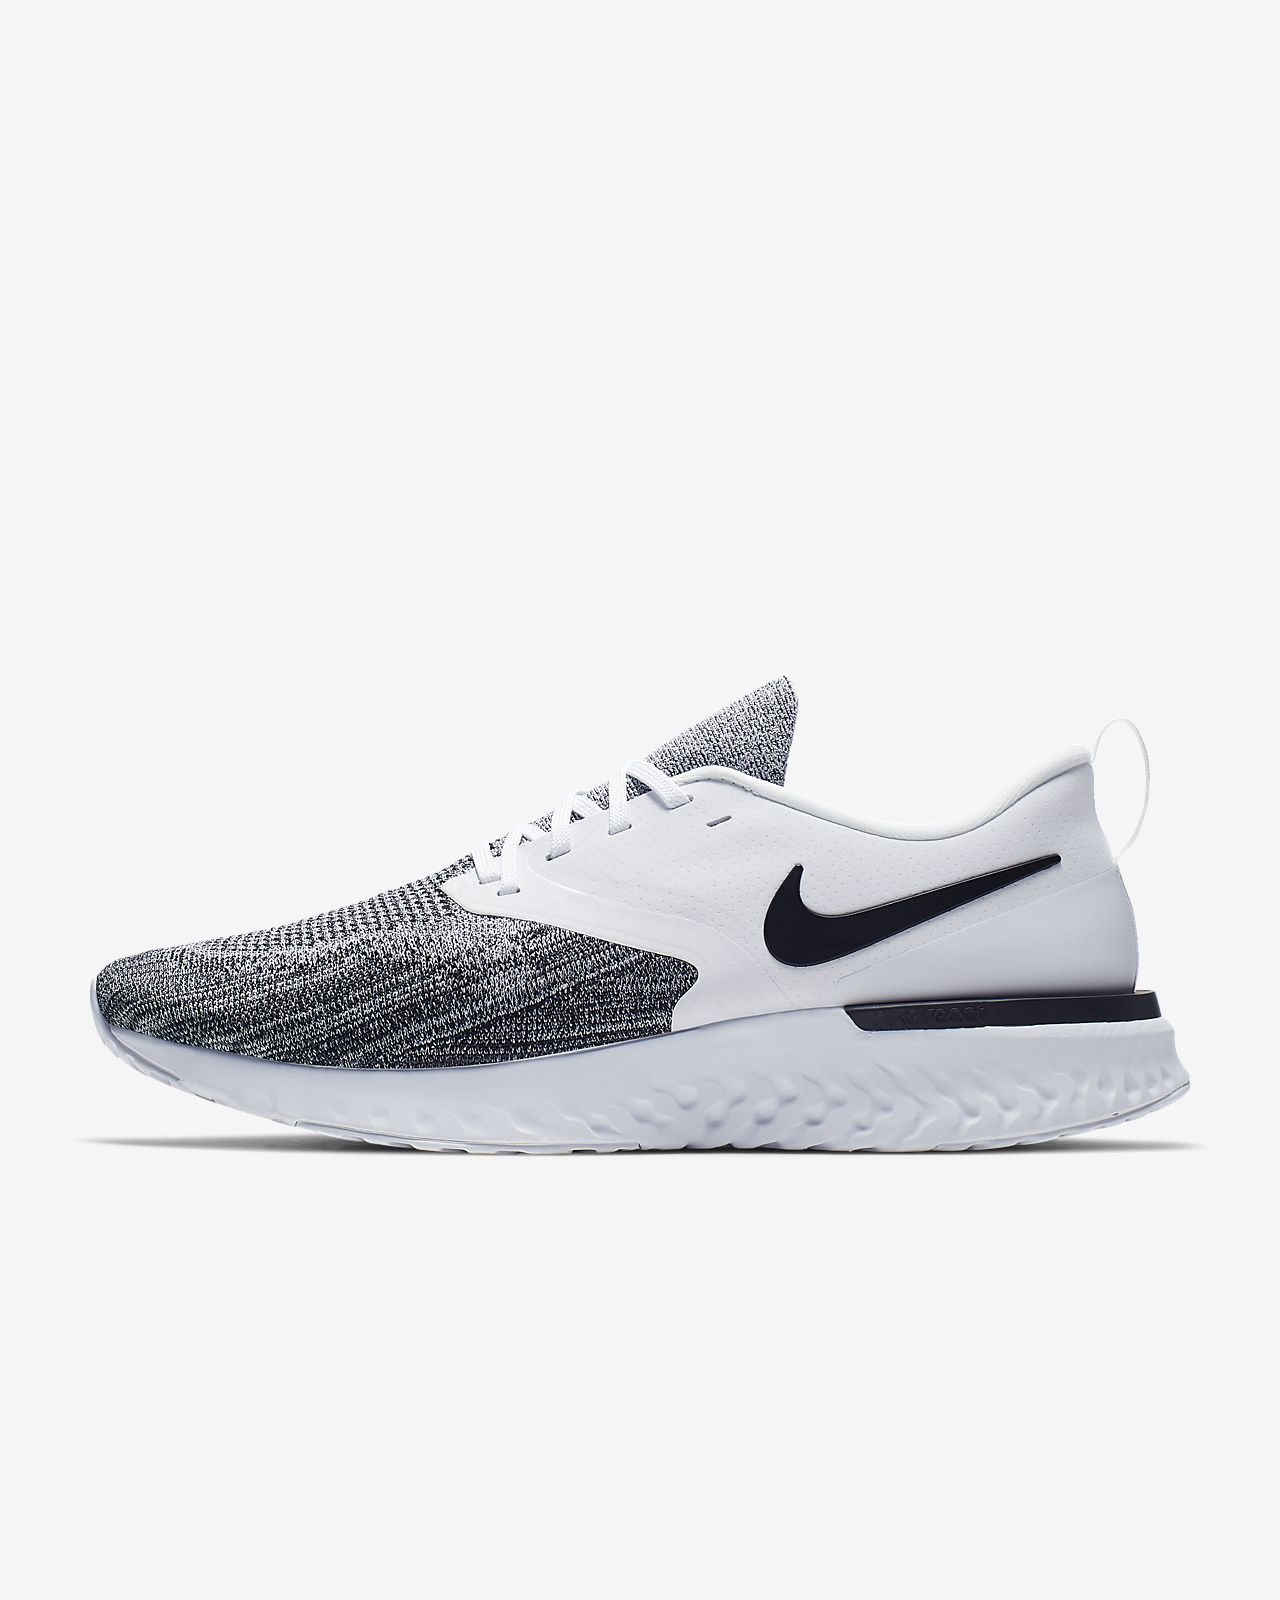 nike odyssey react mens running shoes